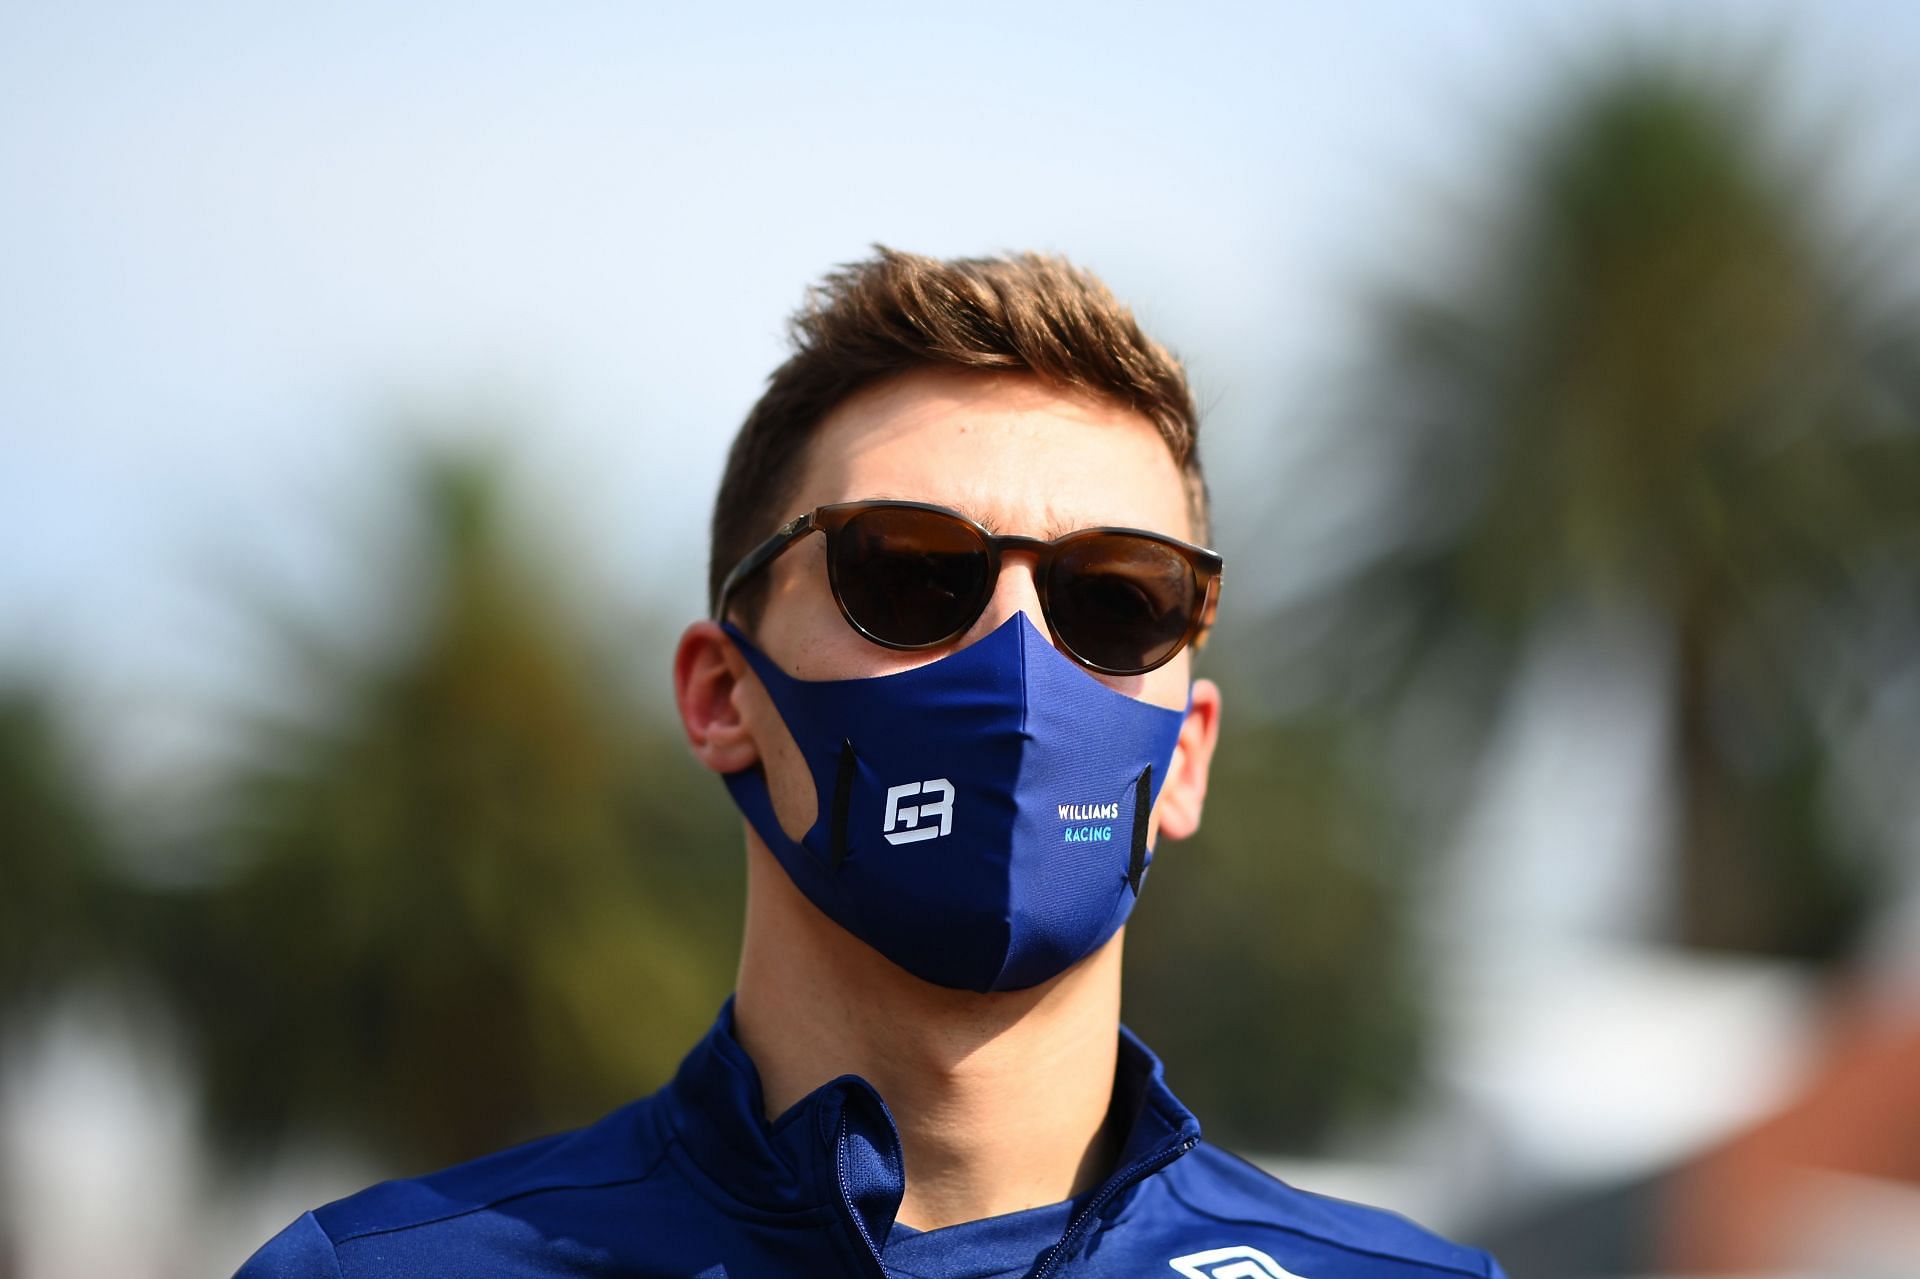 F1 Grand Prix of Mexico - George Russell arrives at the paddock